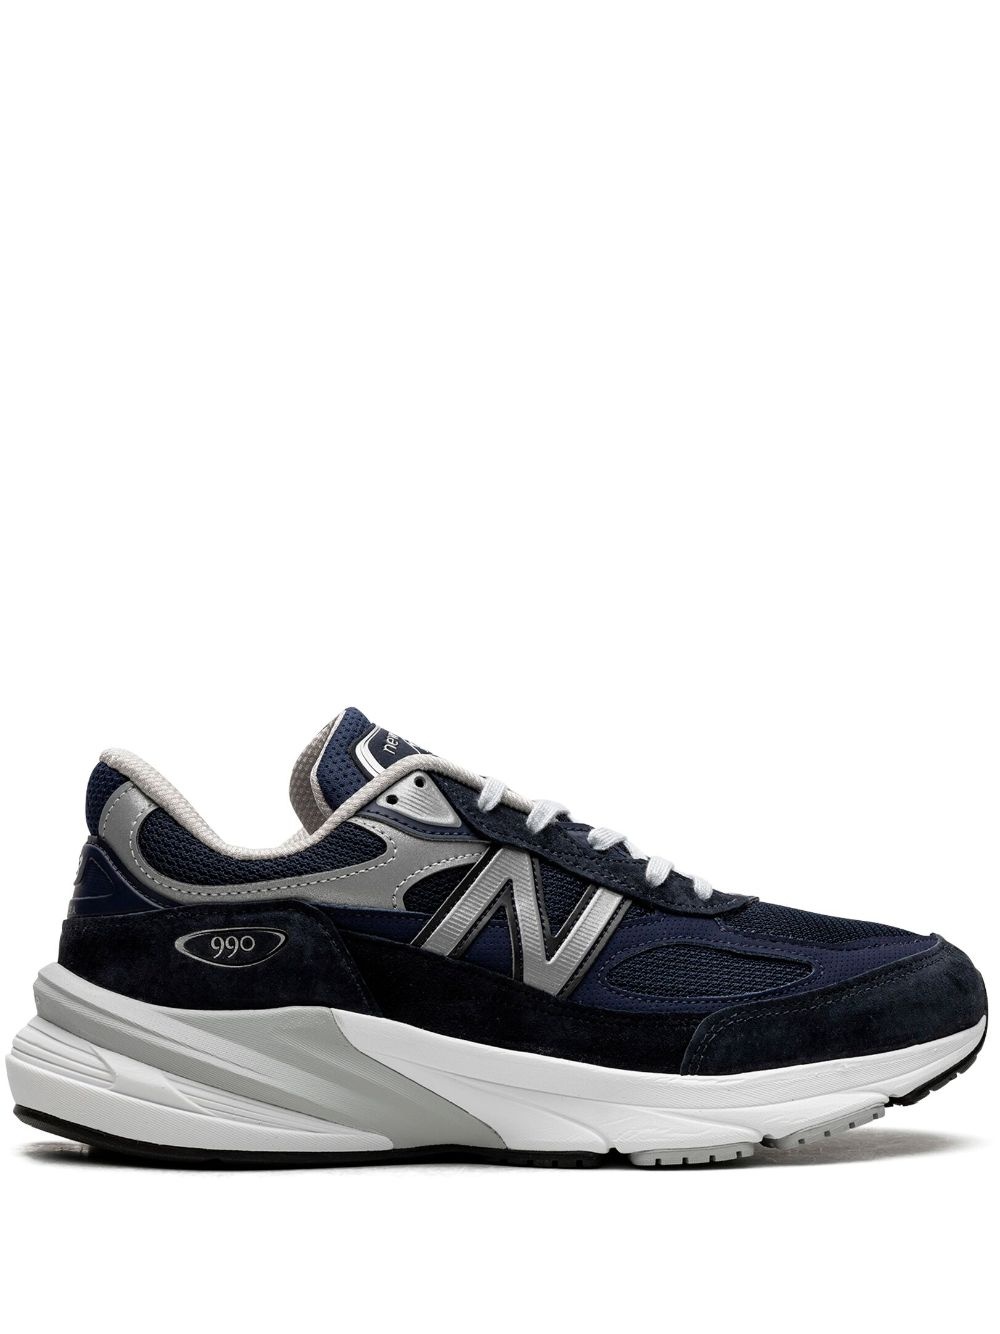 990v6 "Navy" leather sneakers - 1